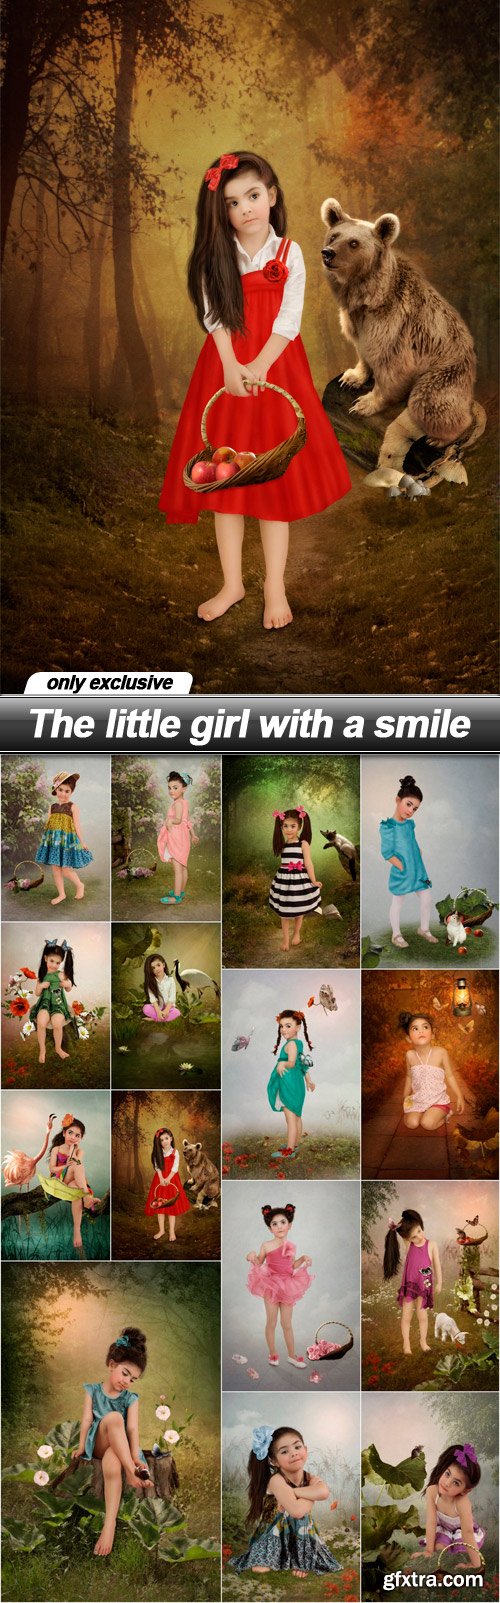 The little girl with a smile - 15 UHQ JPEG